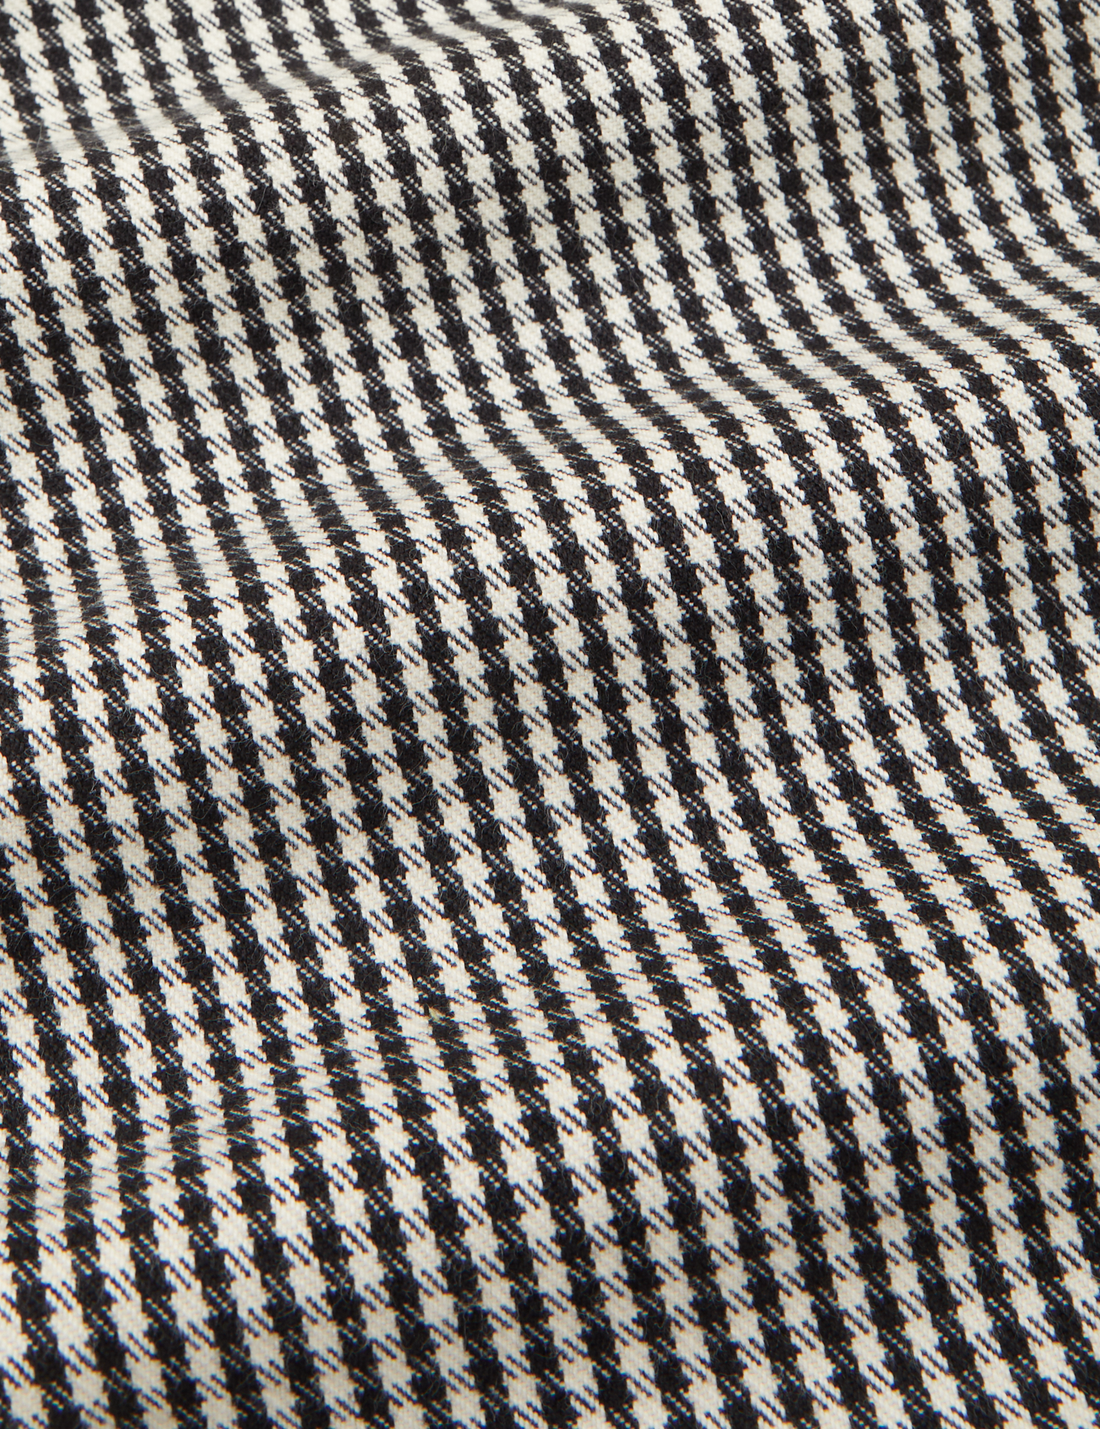 Checker Trousers in Black & White fabric detail close up